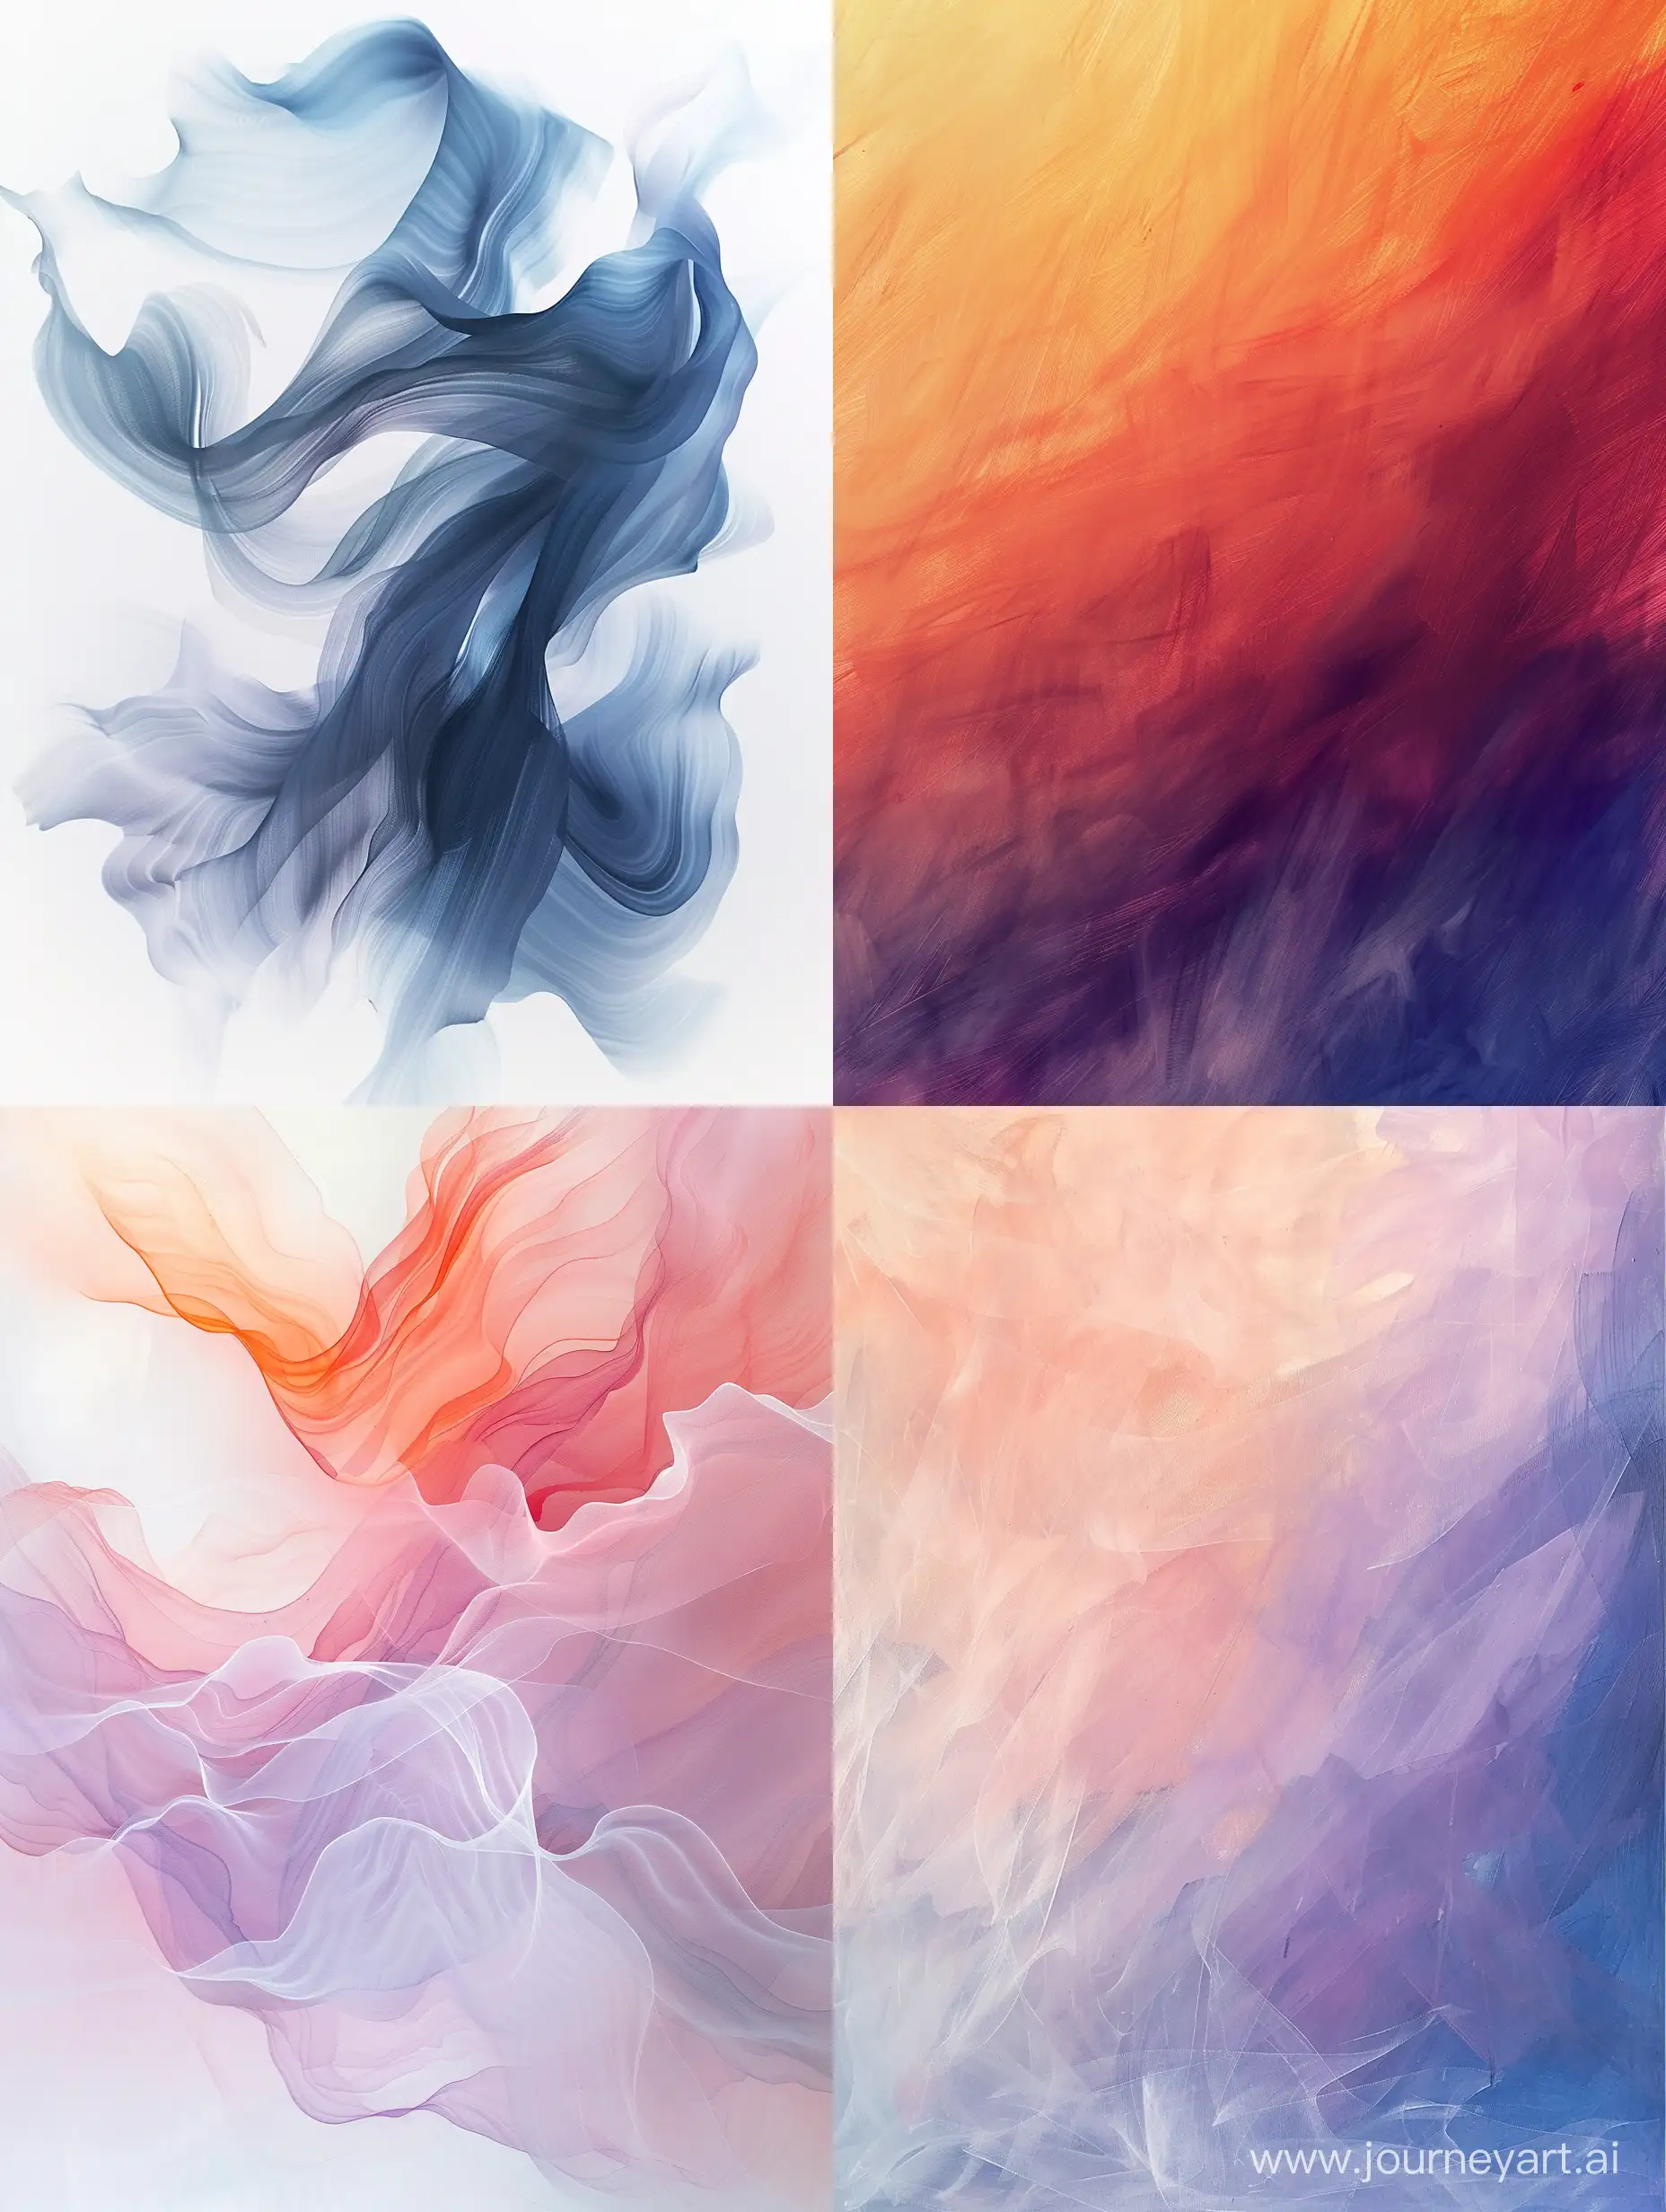 Craft minimalist abstract paintings inspired by the movement of wind, using subtle gradients and delicate brushstrokes to evoke a sense of movement and flow.